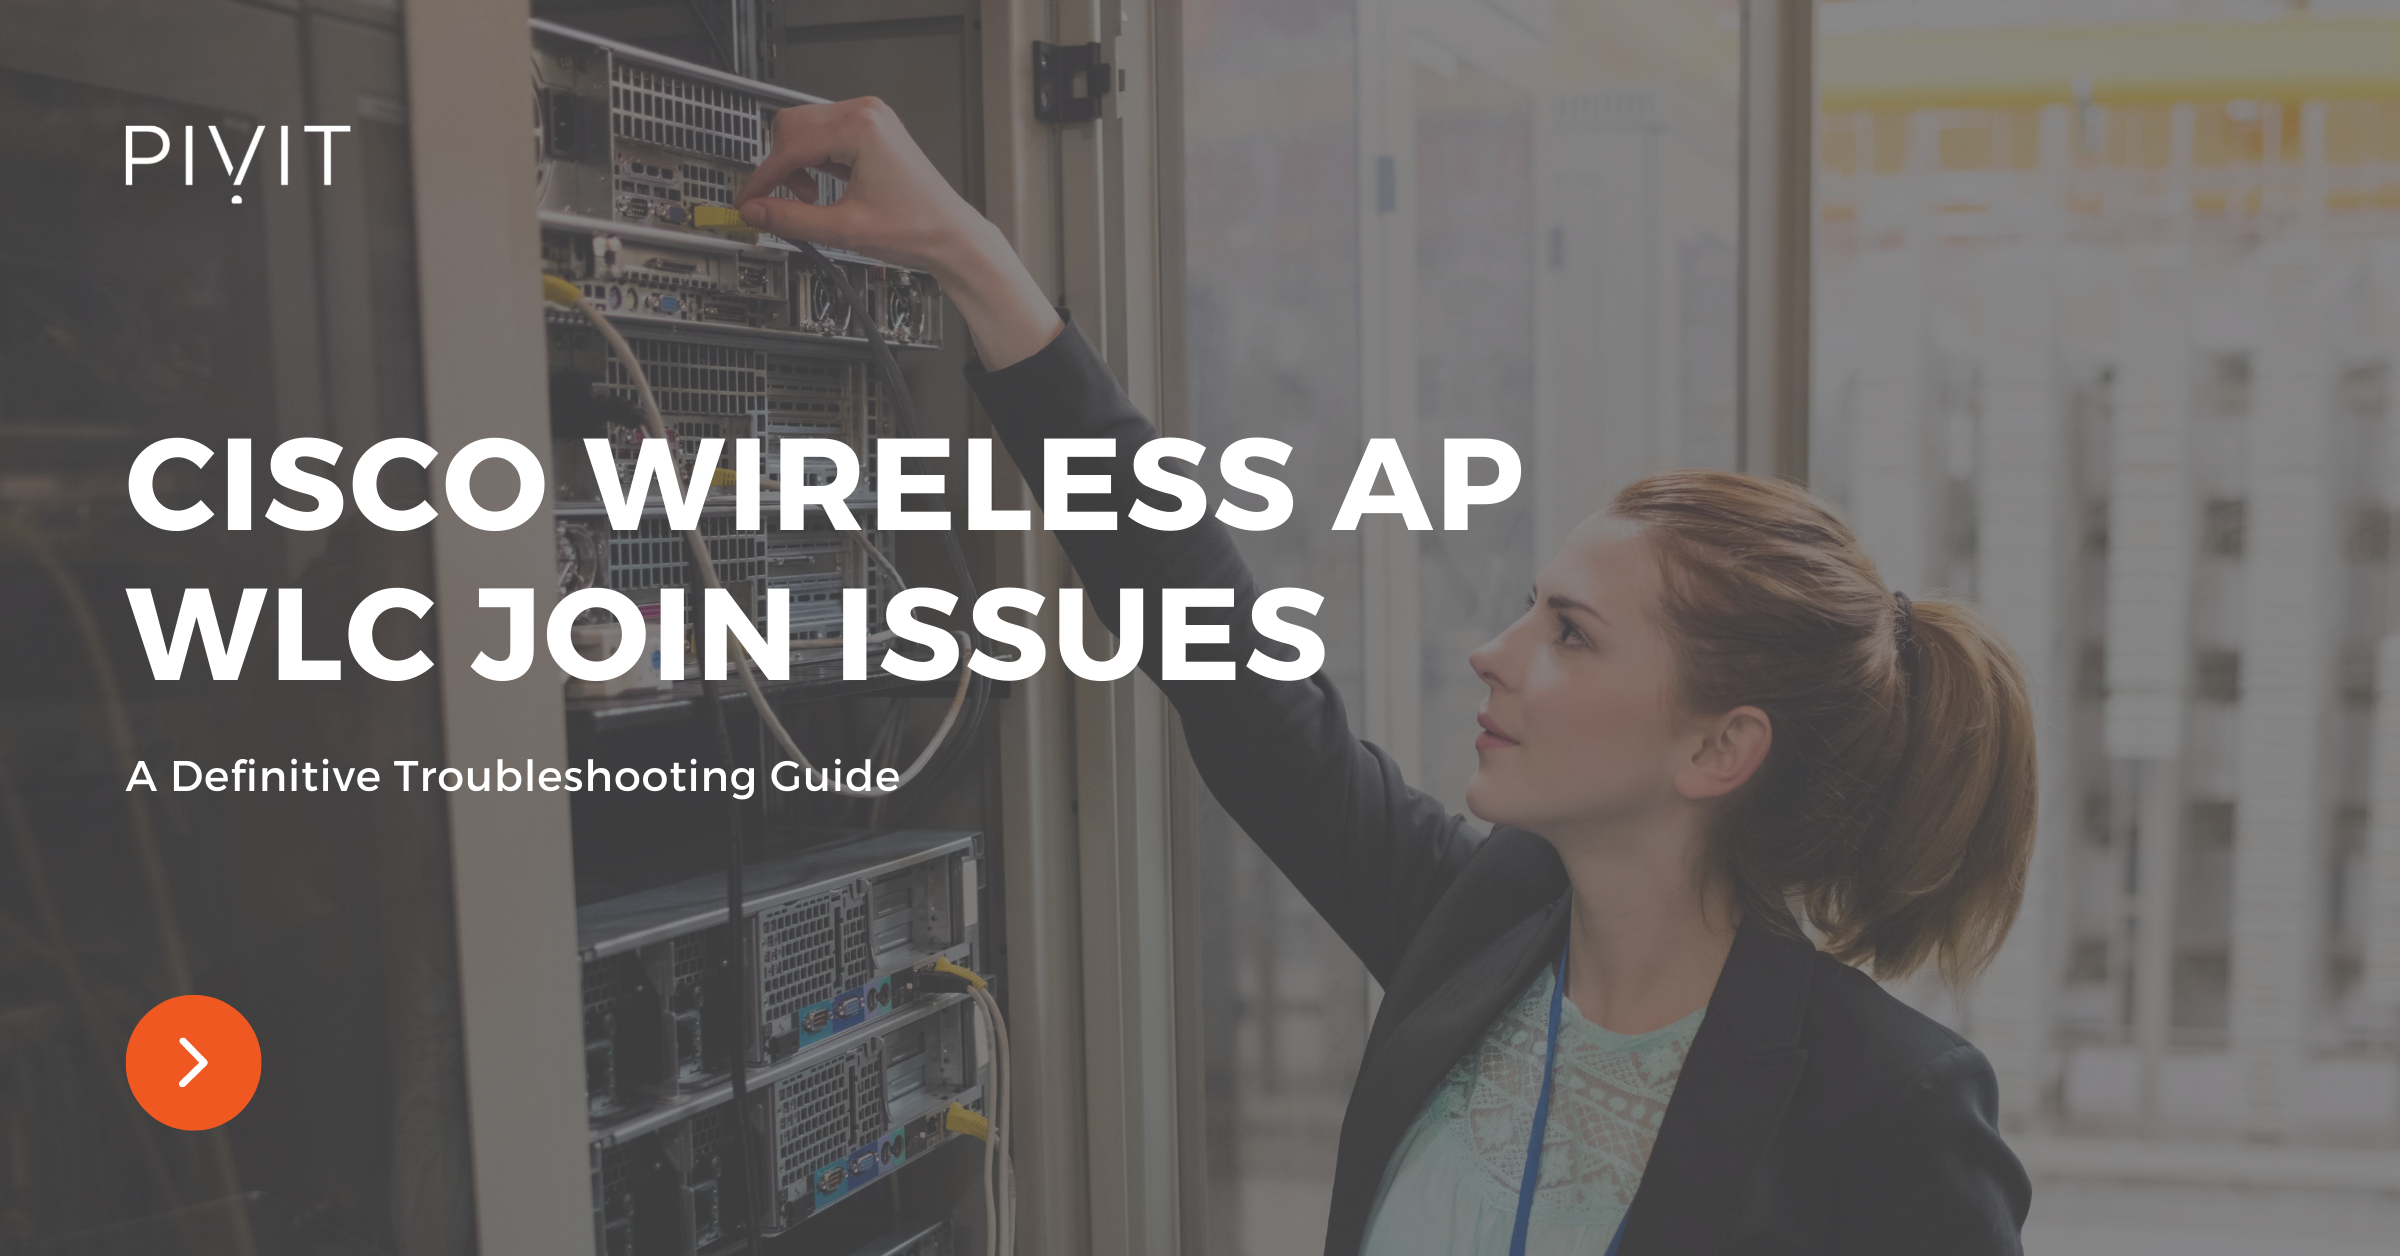 A Definitive Troubleshooting Guide: Cisco Wireless AP WLC Join Issues